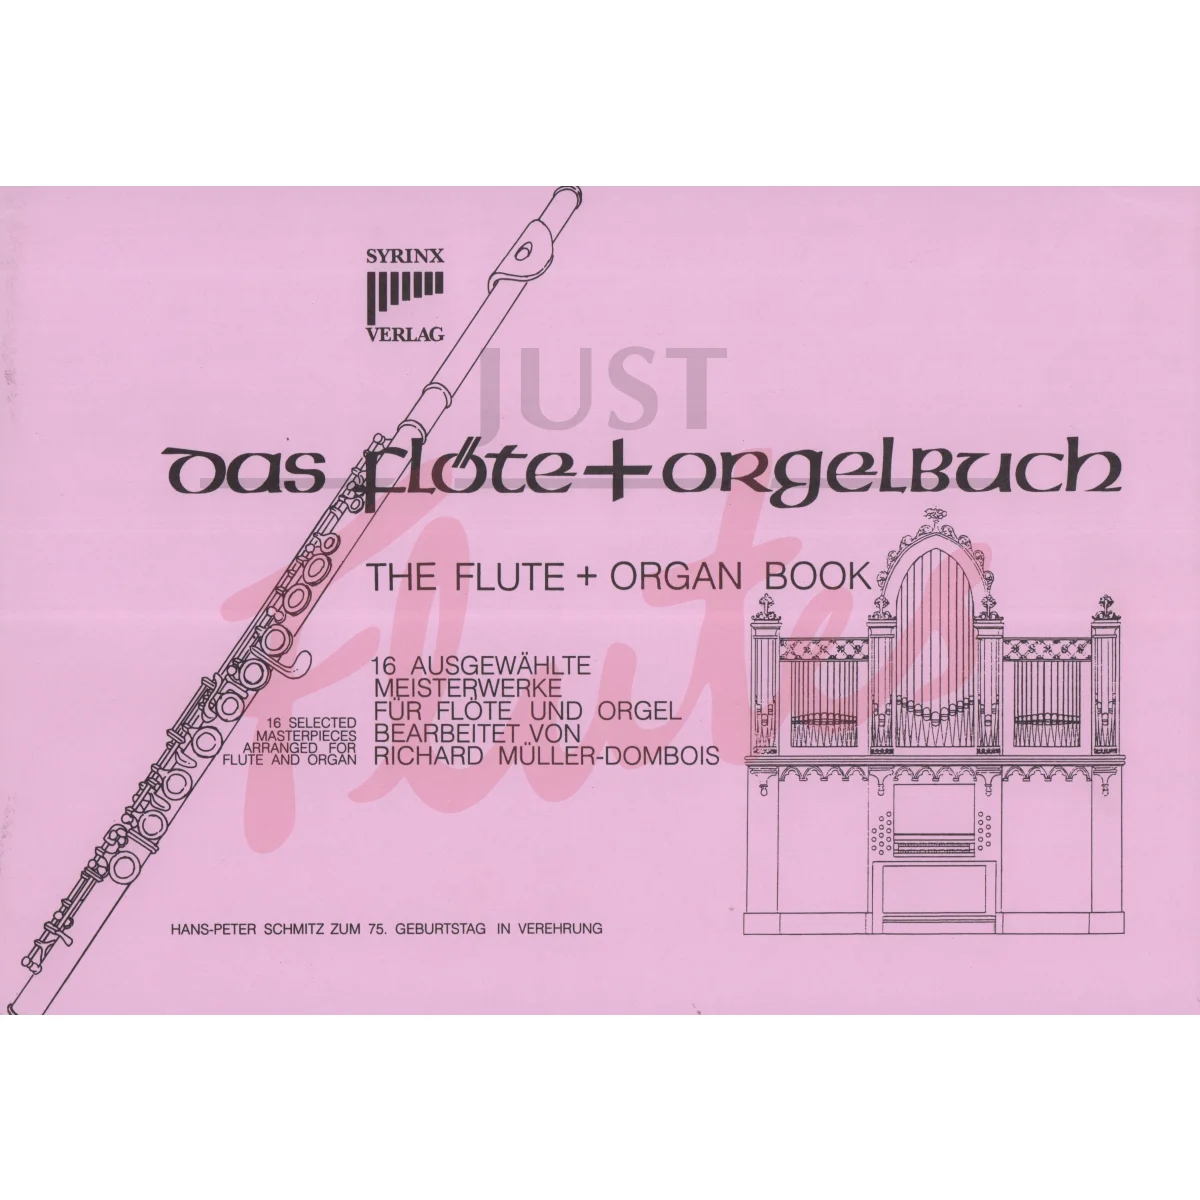 The Flute and Organ Book